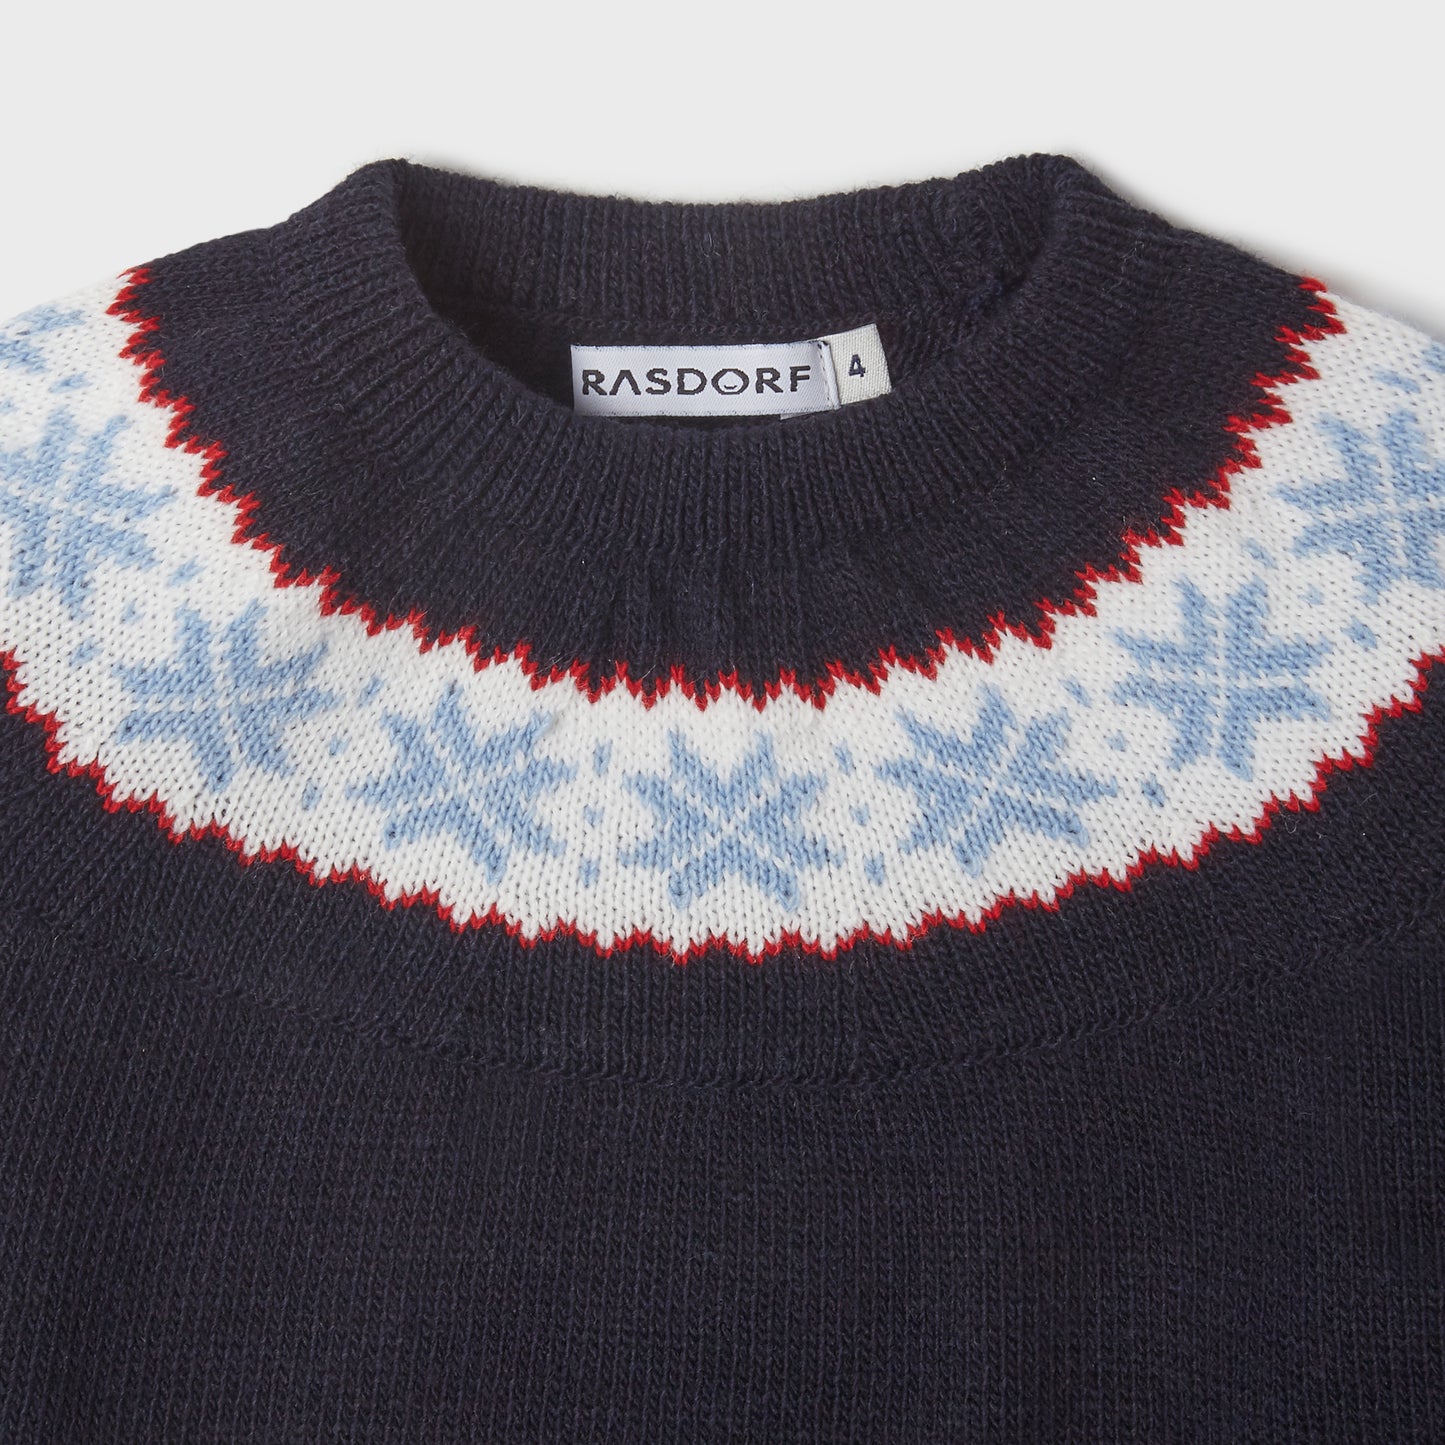 Navy blue sweater with light blue fret